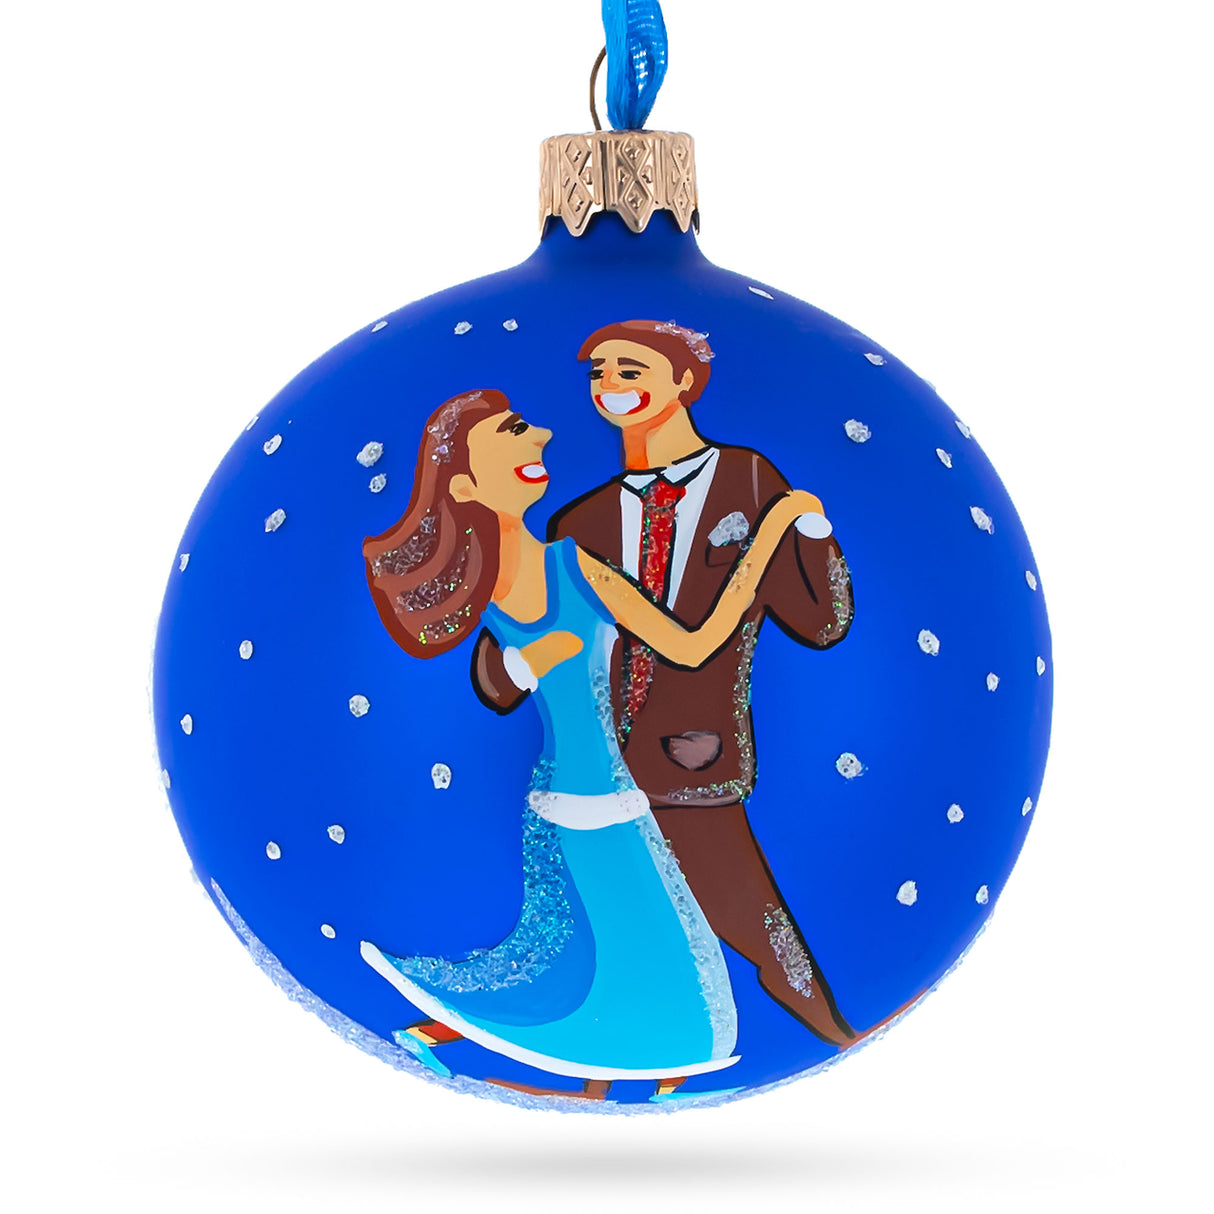 I Love Dancing Blown Glass Ball Christmas Ornament 3.25 Inches in Blue color, Round shape